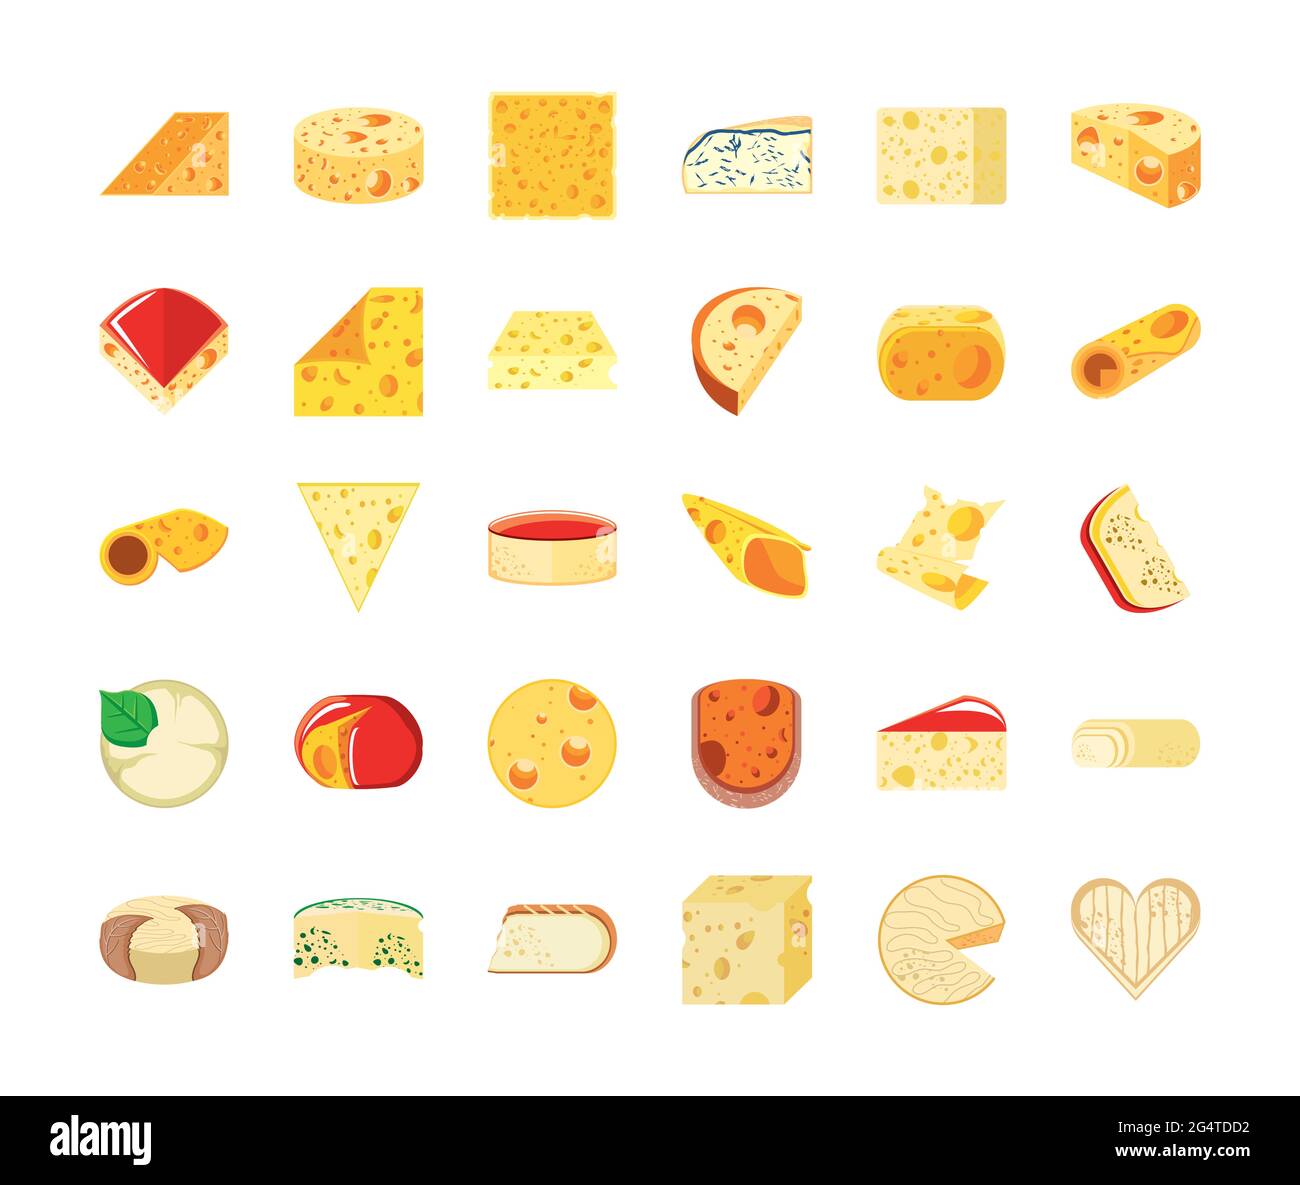 set of cheeses Stock Vector